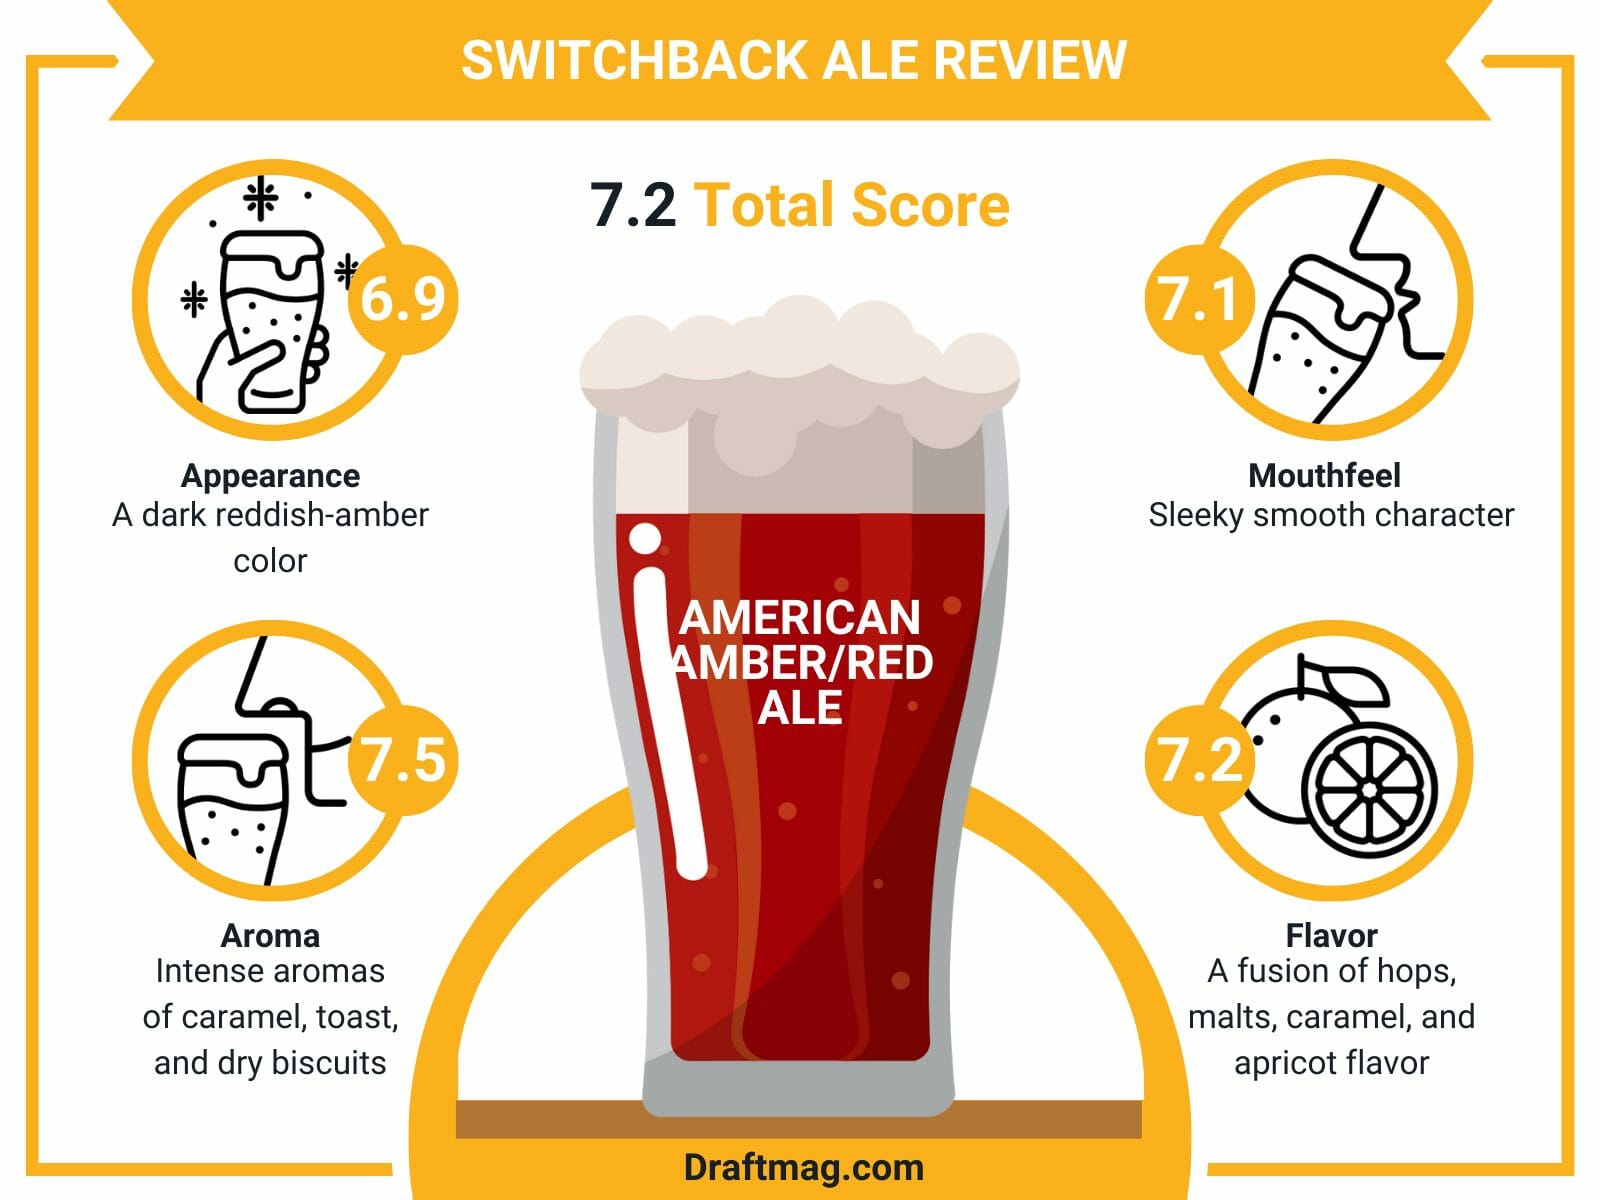 Switchback ale review infographic